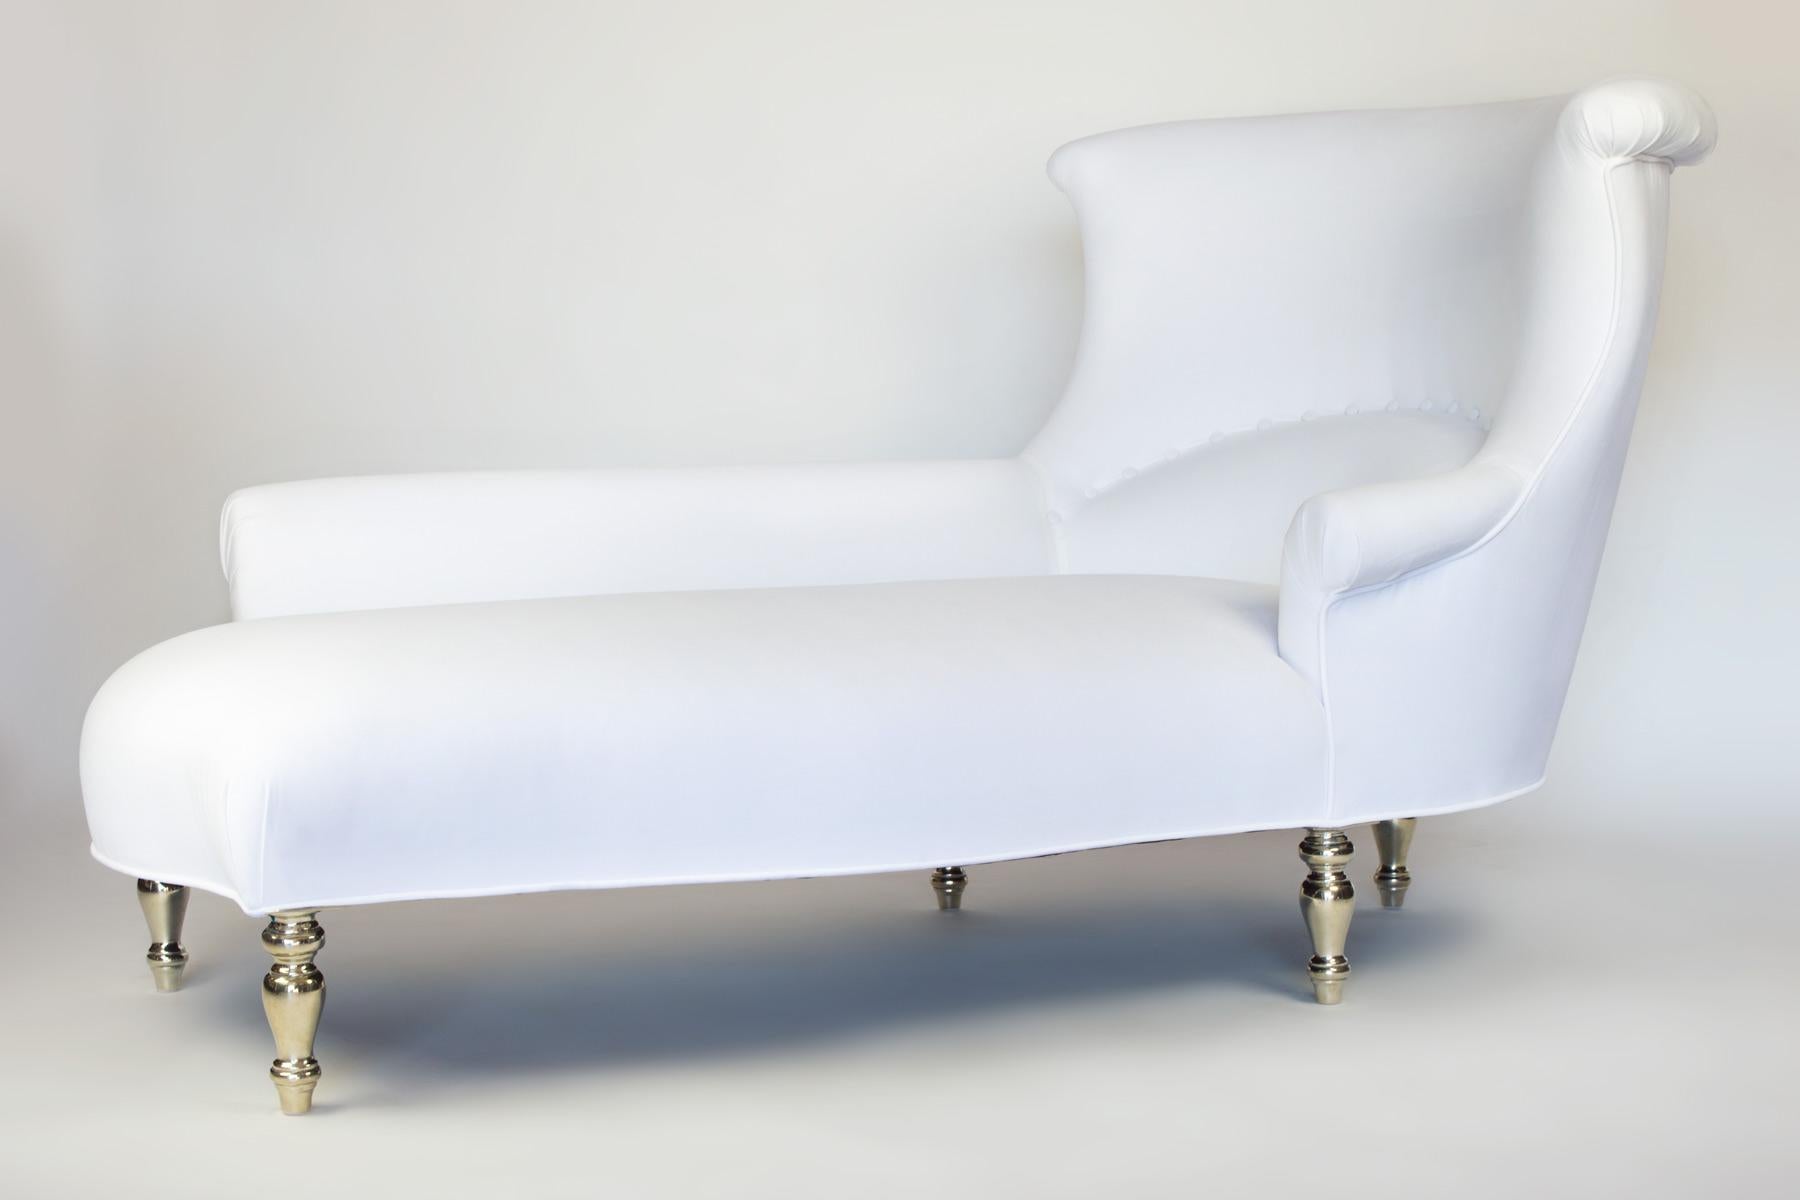 This version of our classic Garonne chaise lounge has 5 white bronze legs and white velvet upholstery. From every angle, you see its distinctive elegant curved lines. The bronze legs create a bold statement.This piece is perfect for cuddling up with